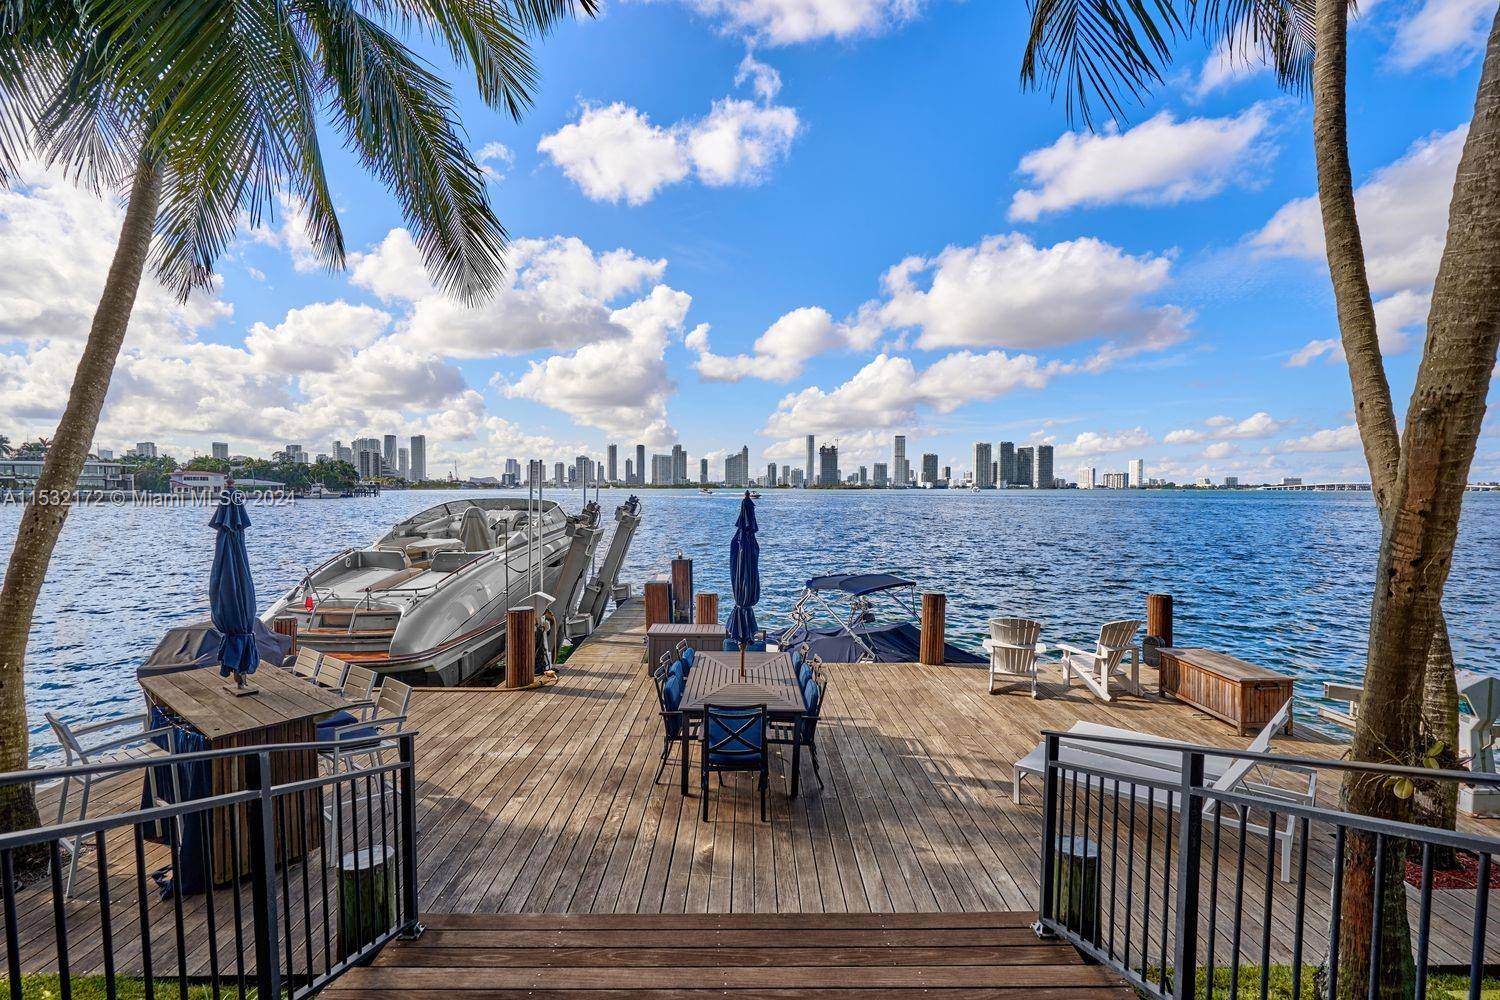 One of the very best lots on the Venetian Islands is now available.